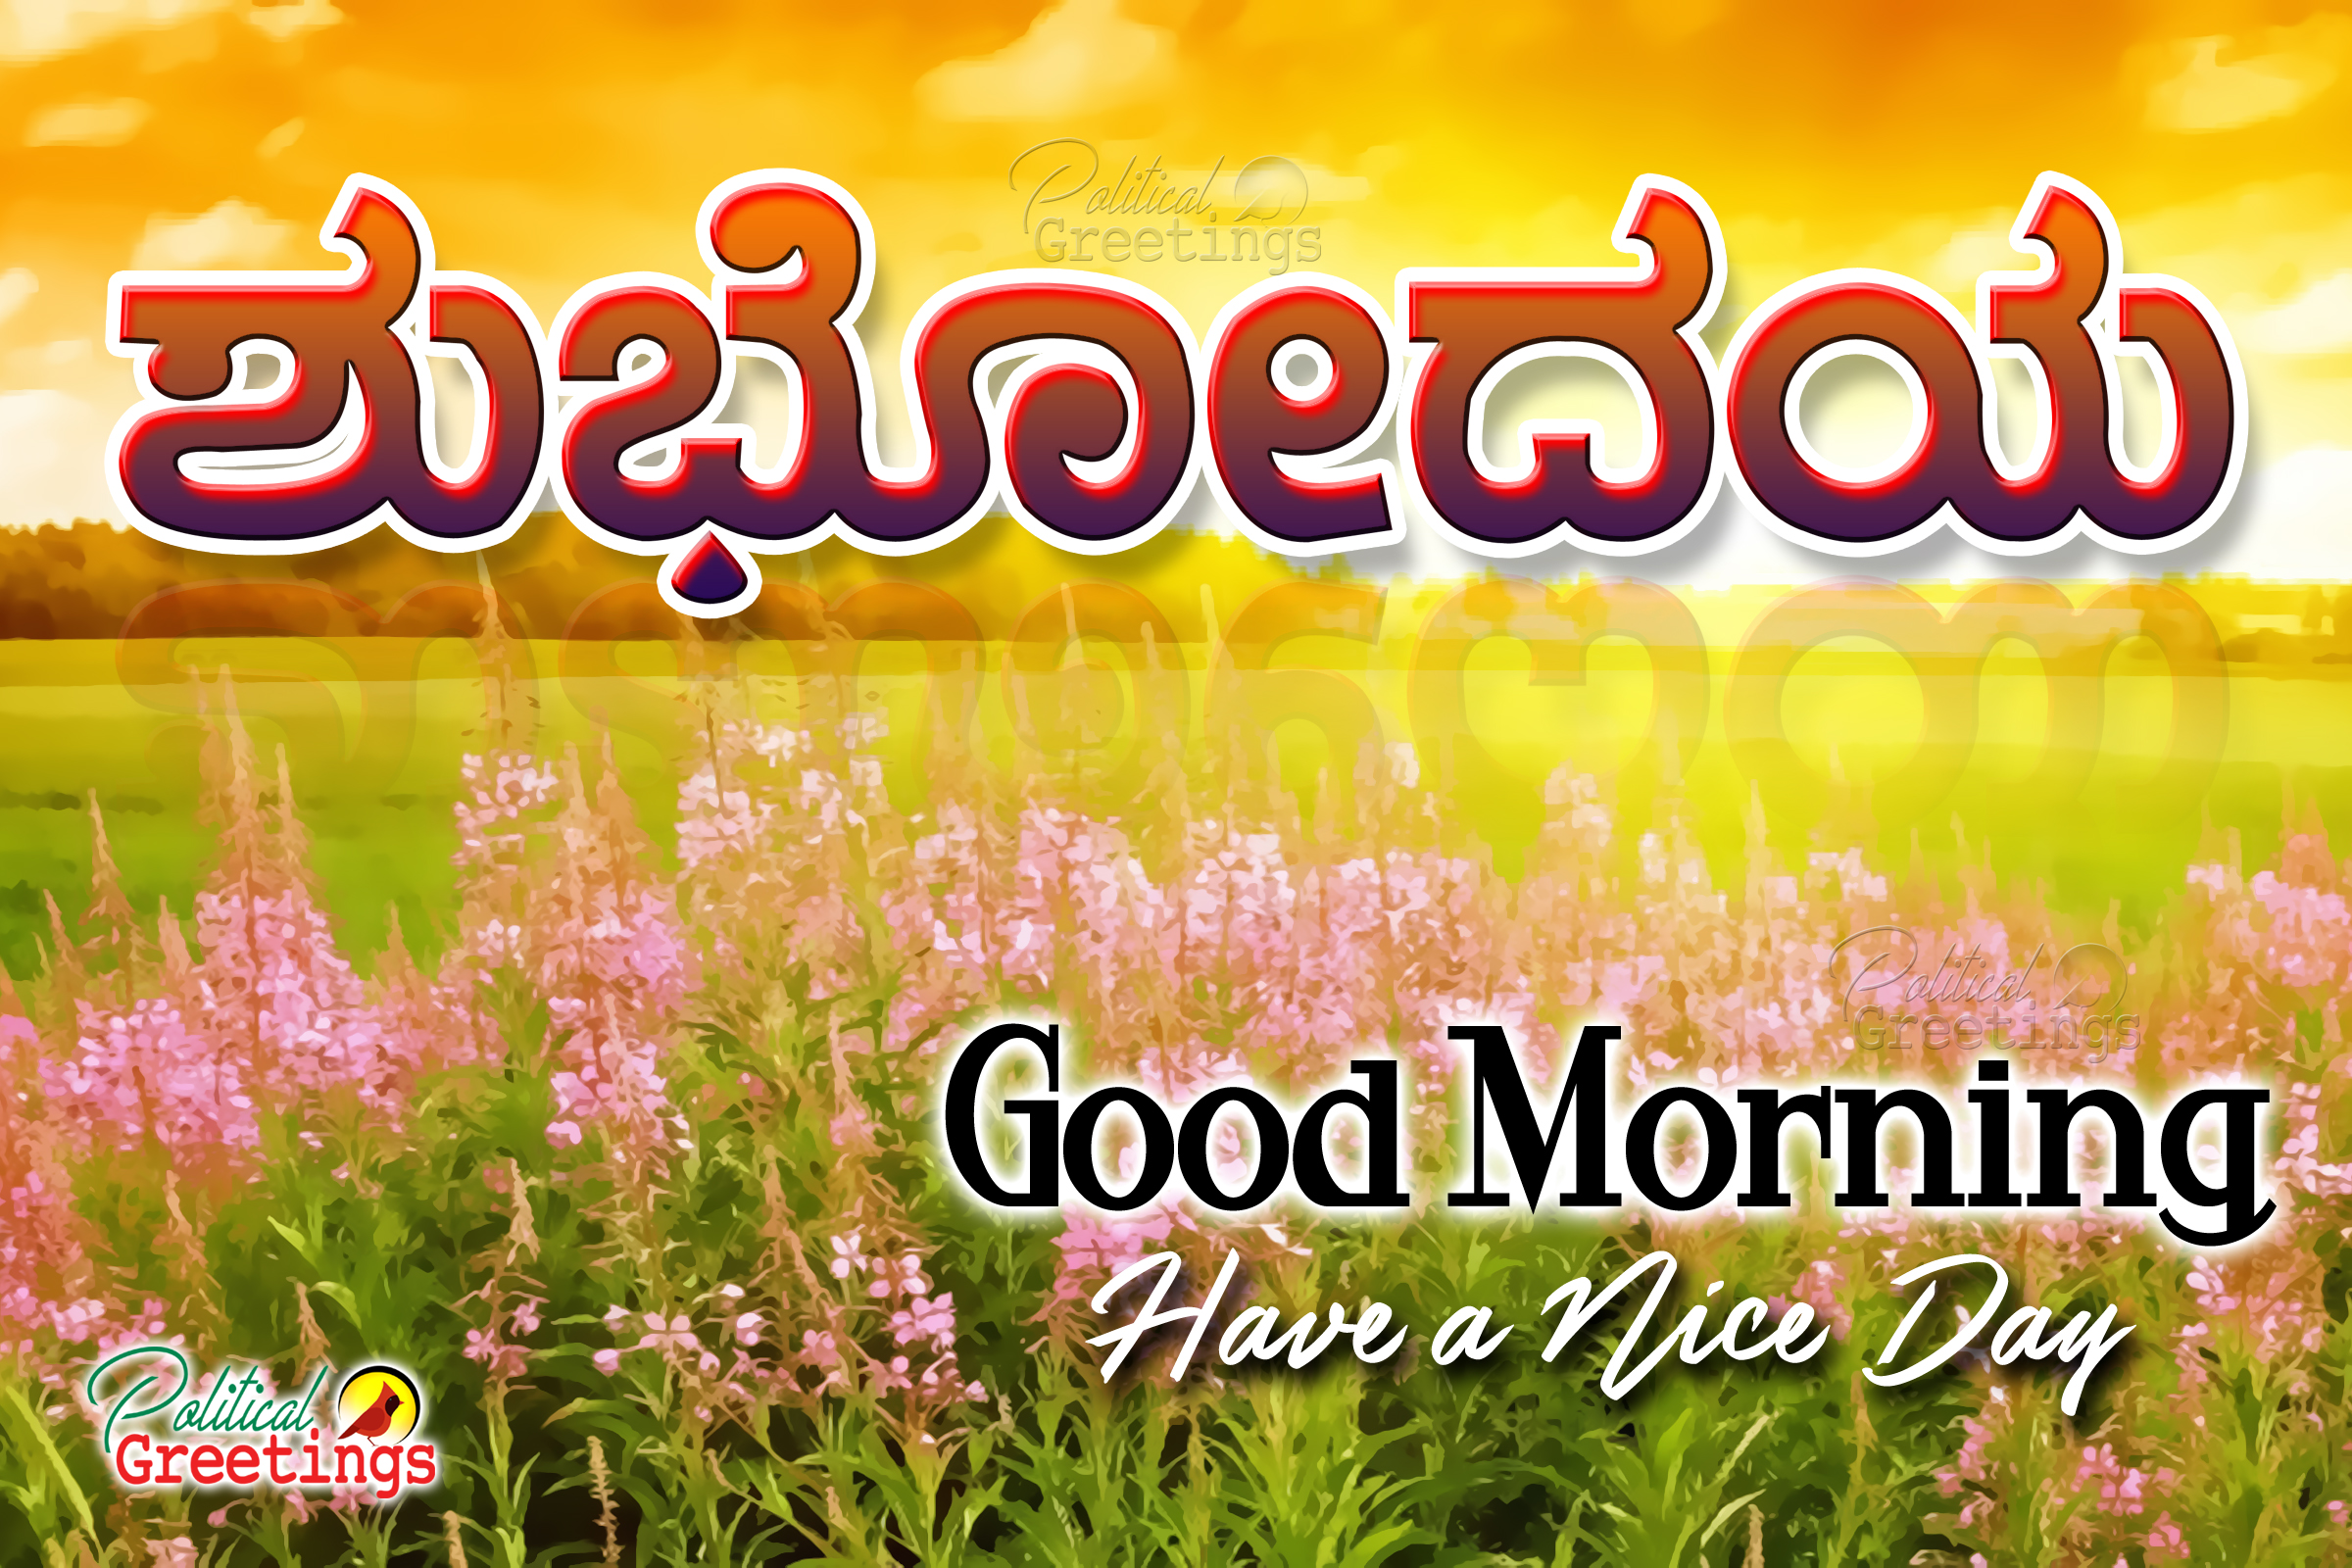 Kannada Good Morning Messages With Nice Greetings Images - Good Morning  Wishes In Kannada - 2400x1600 Wallpaper 